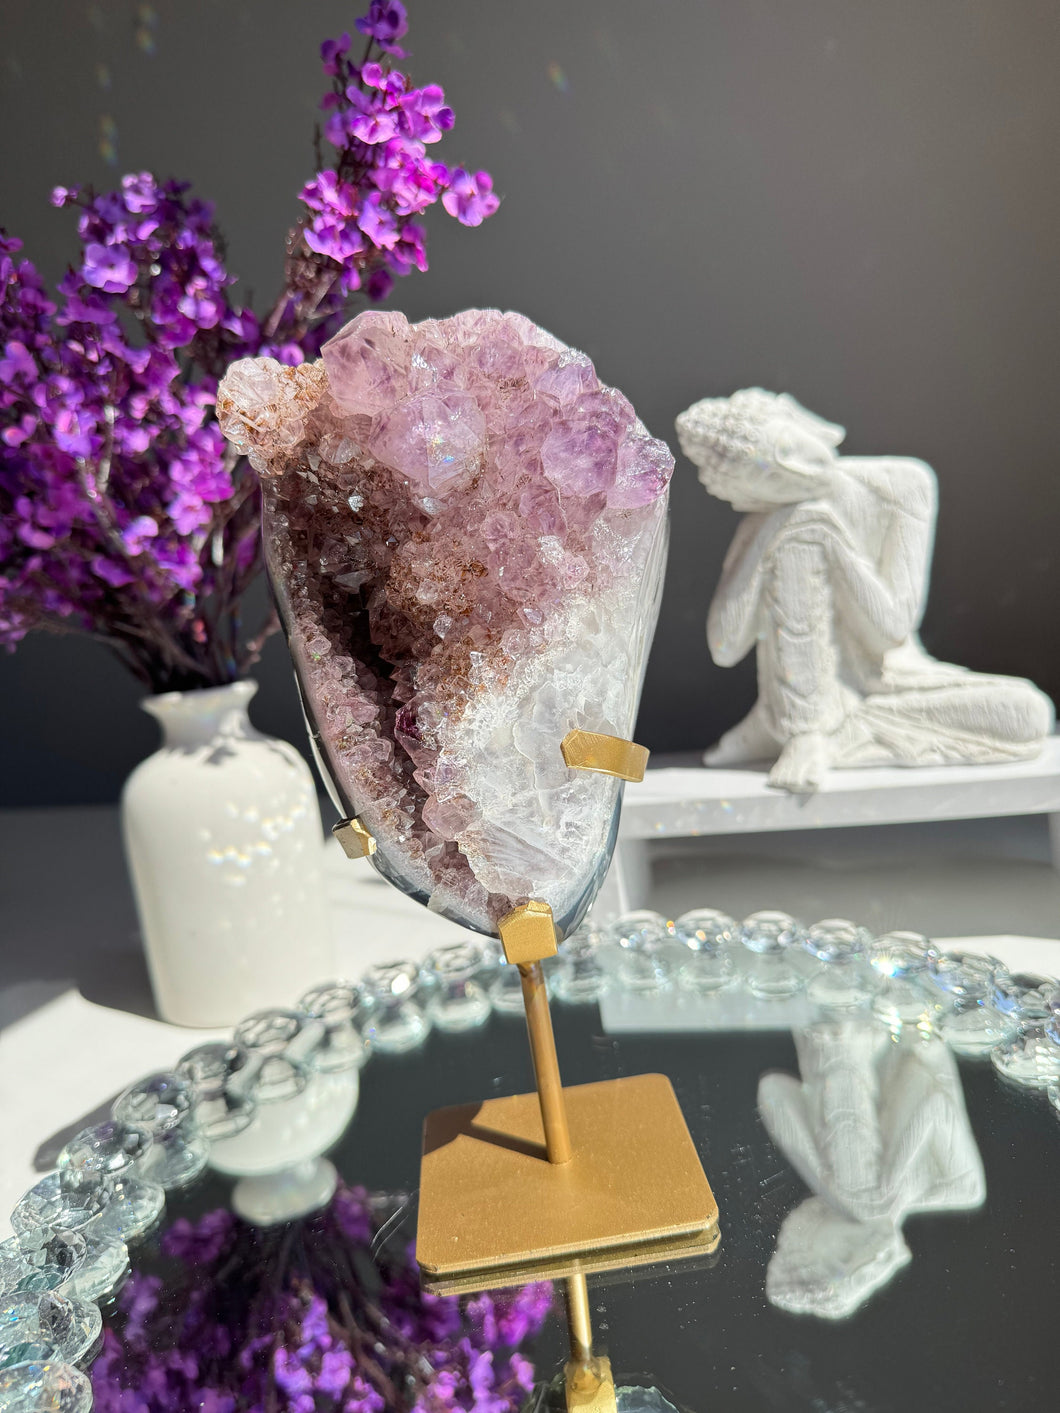 Amethyst geode with agate banding Healing crystals 2772